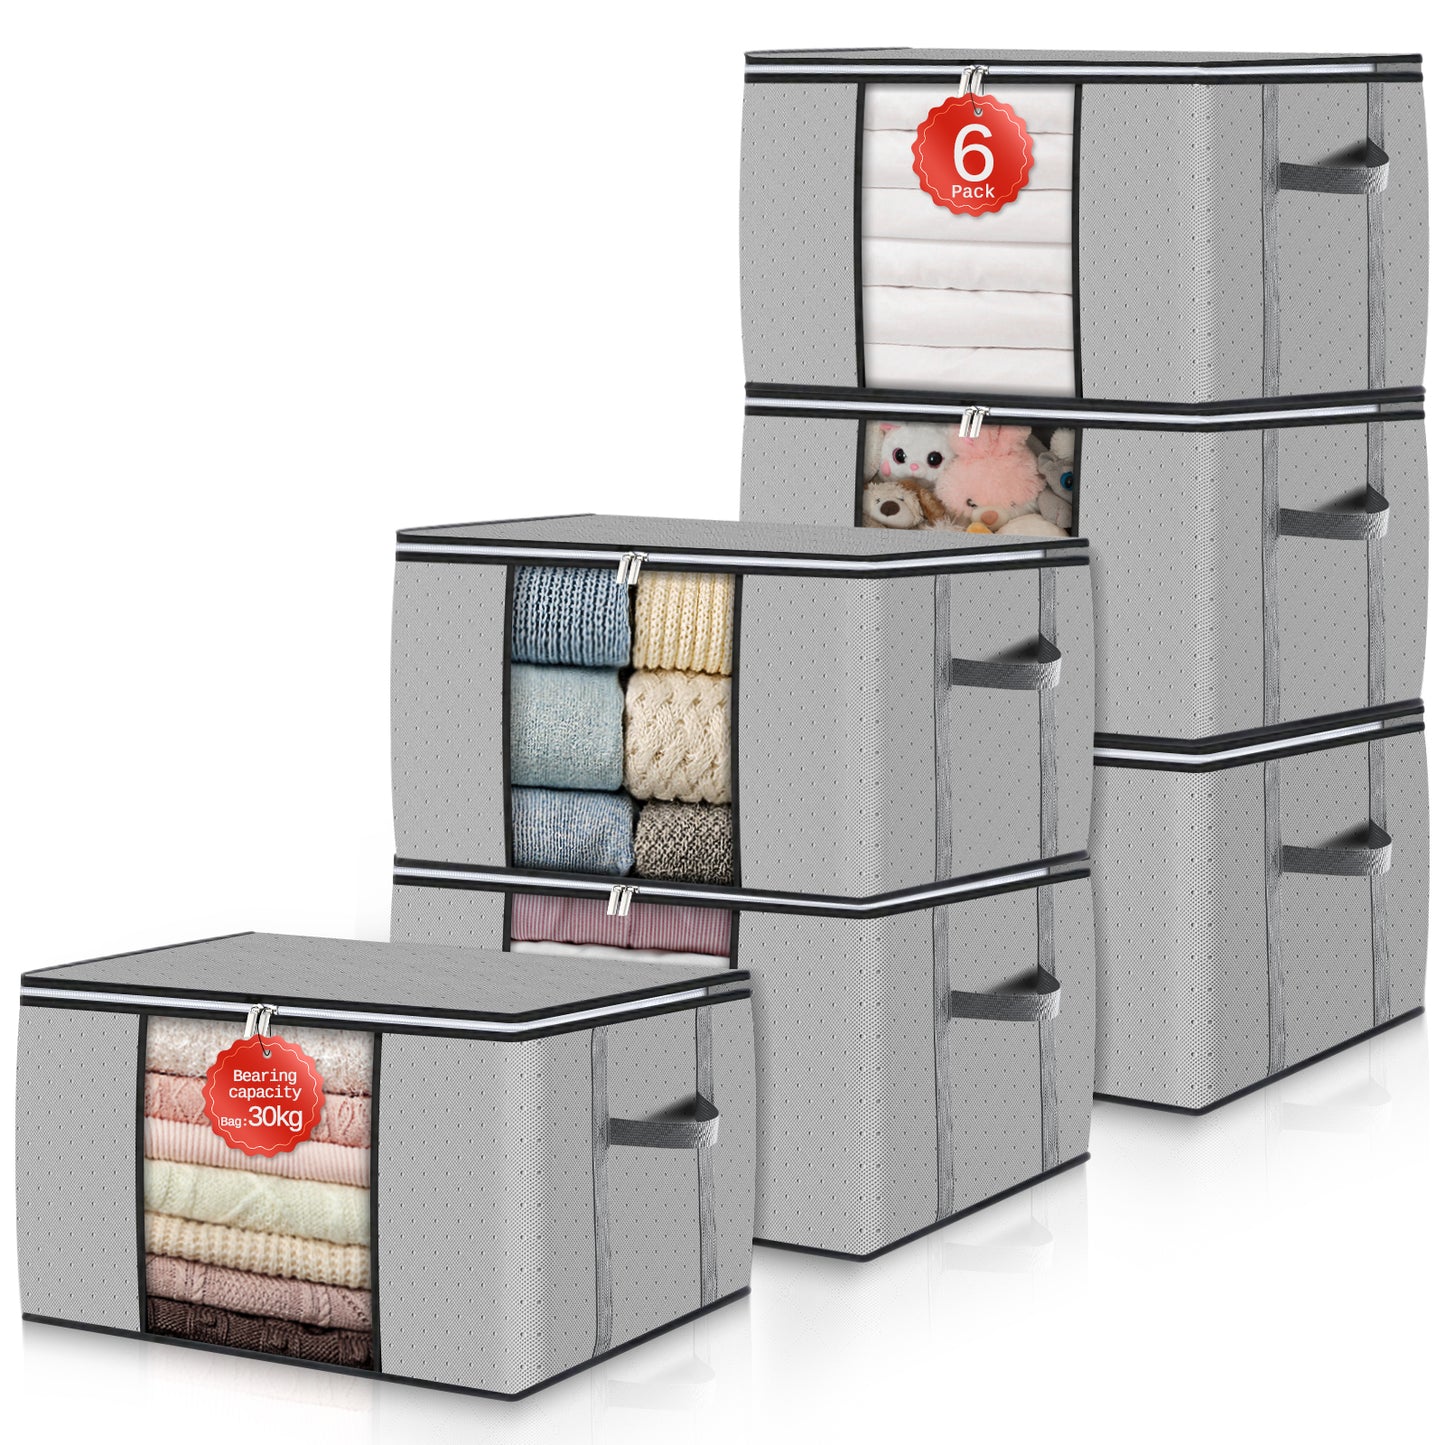 GoMaihe Clothes Storage Bags 6 Pack, Foldable Storage Bins Closet Organizers Stackable Containers with Reinforced Handles and Lids, Polka Dots Gray